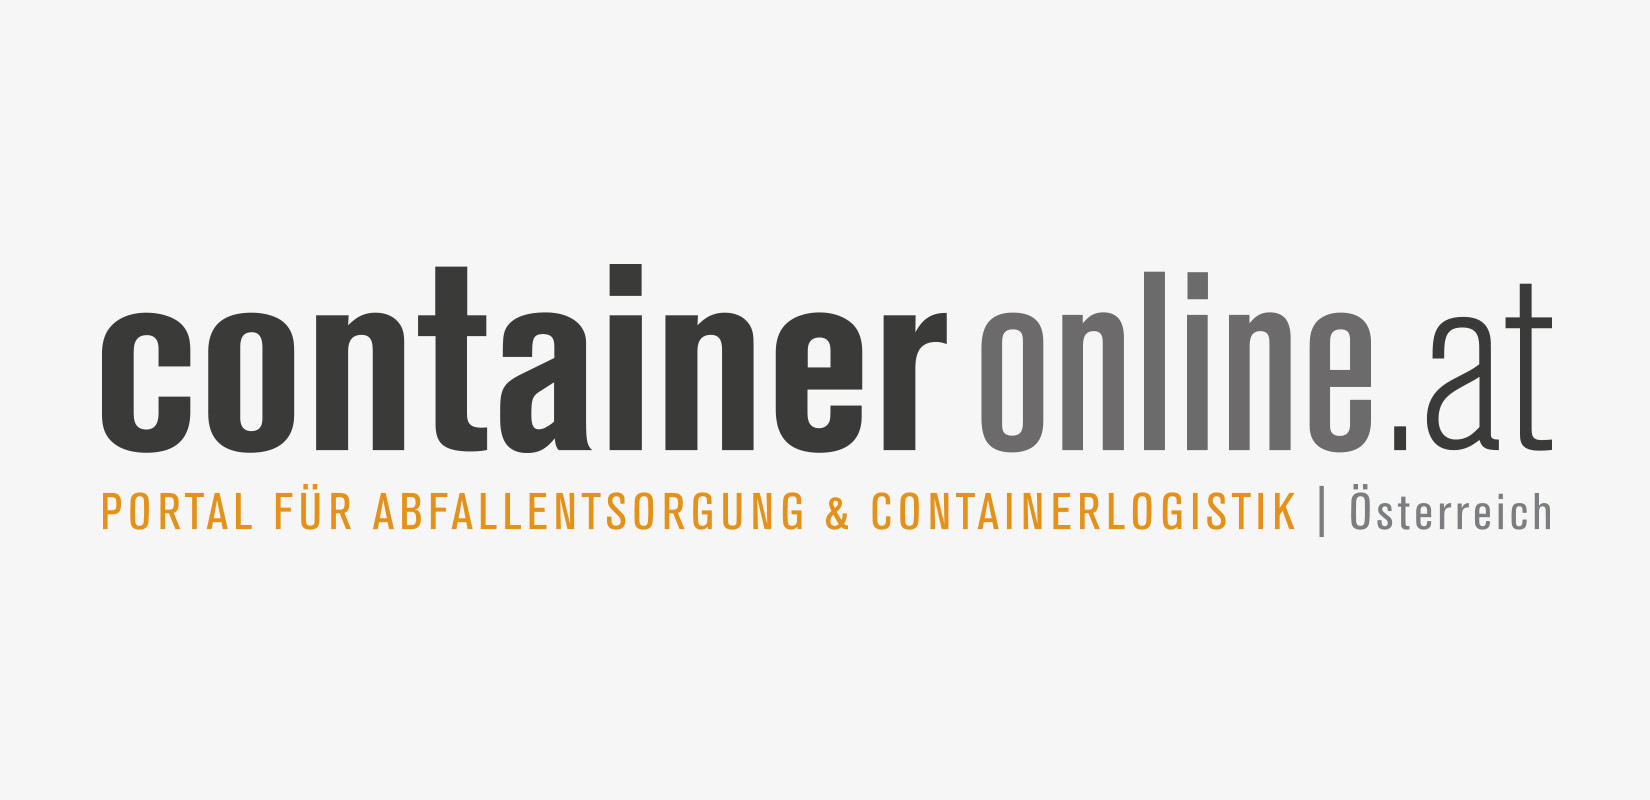 containeronline.at – Logo